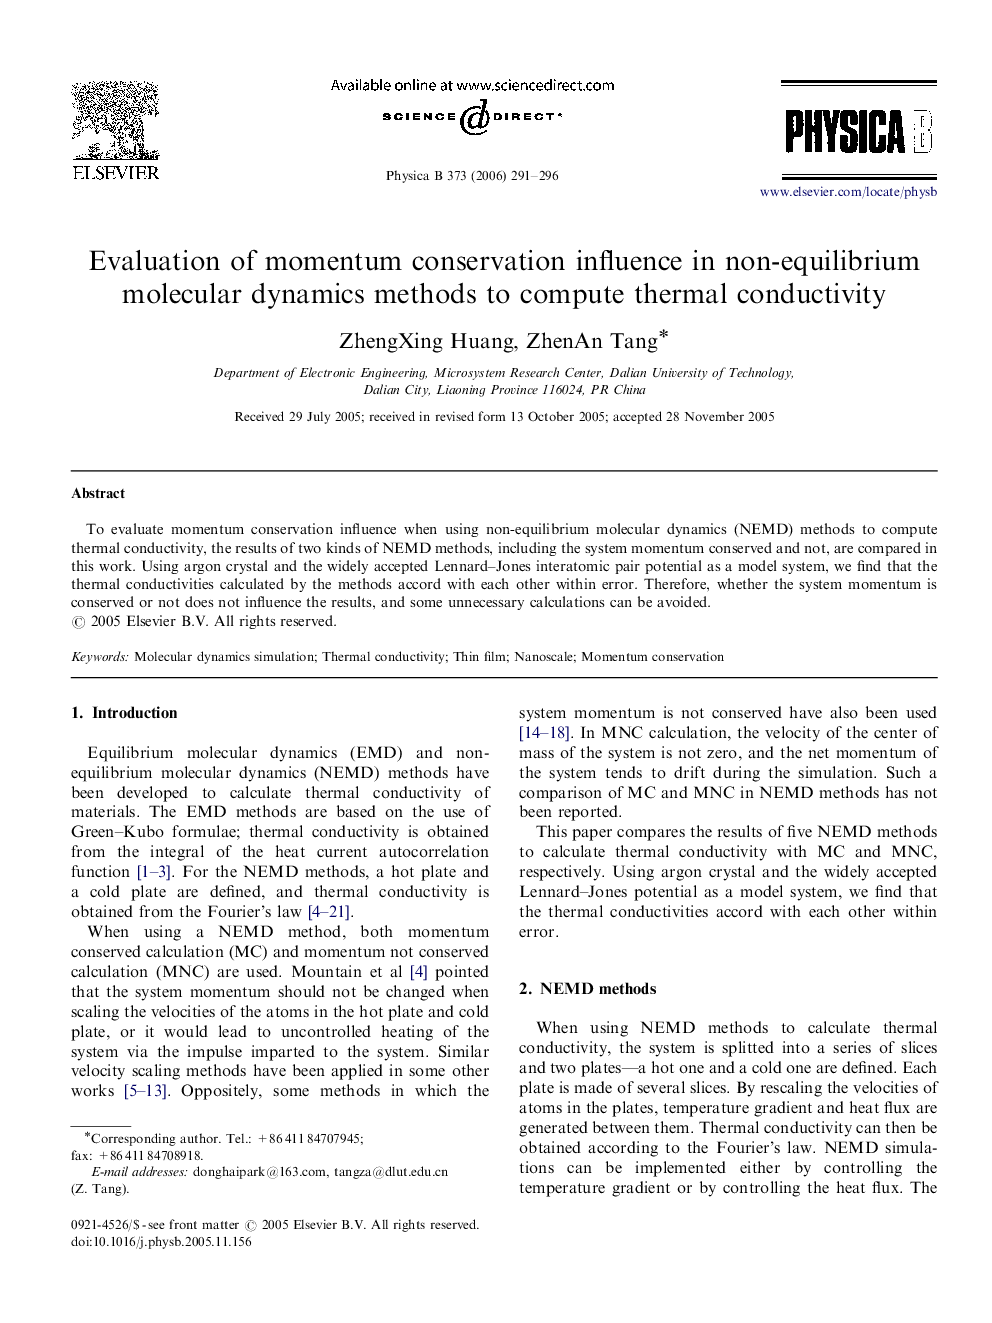 Evaluation of momentum conservation influence in non-equilibrium molecular dynamics methods to compute thermal conductivity